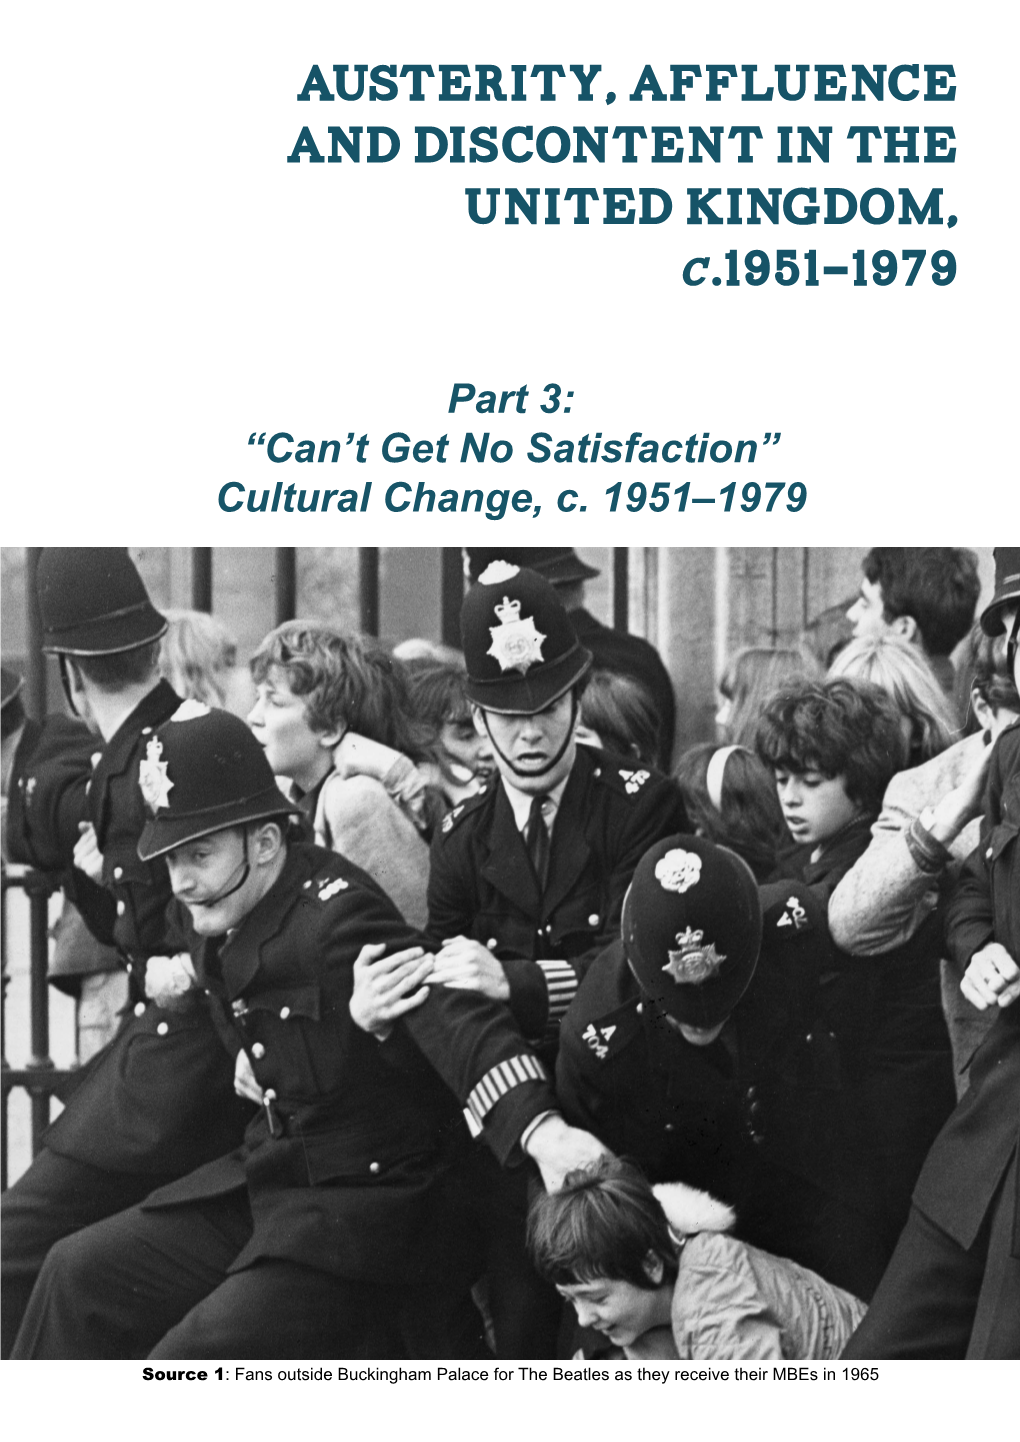 Austerity, Affluence and Discontent in the United Kingdom, .1951-1979